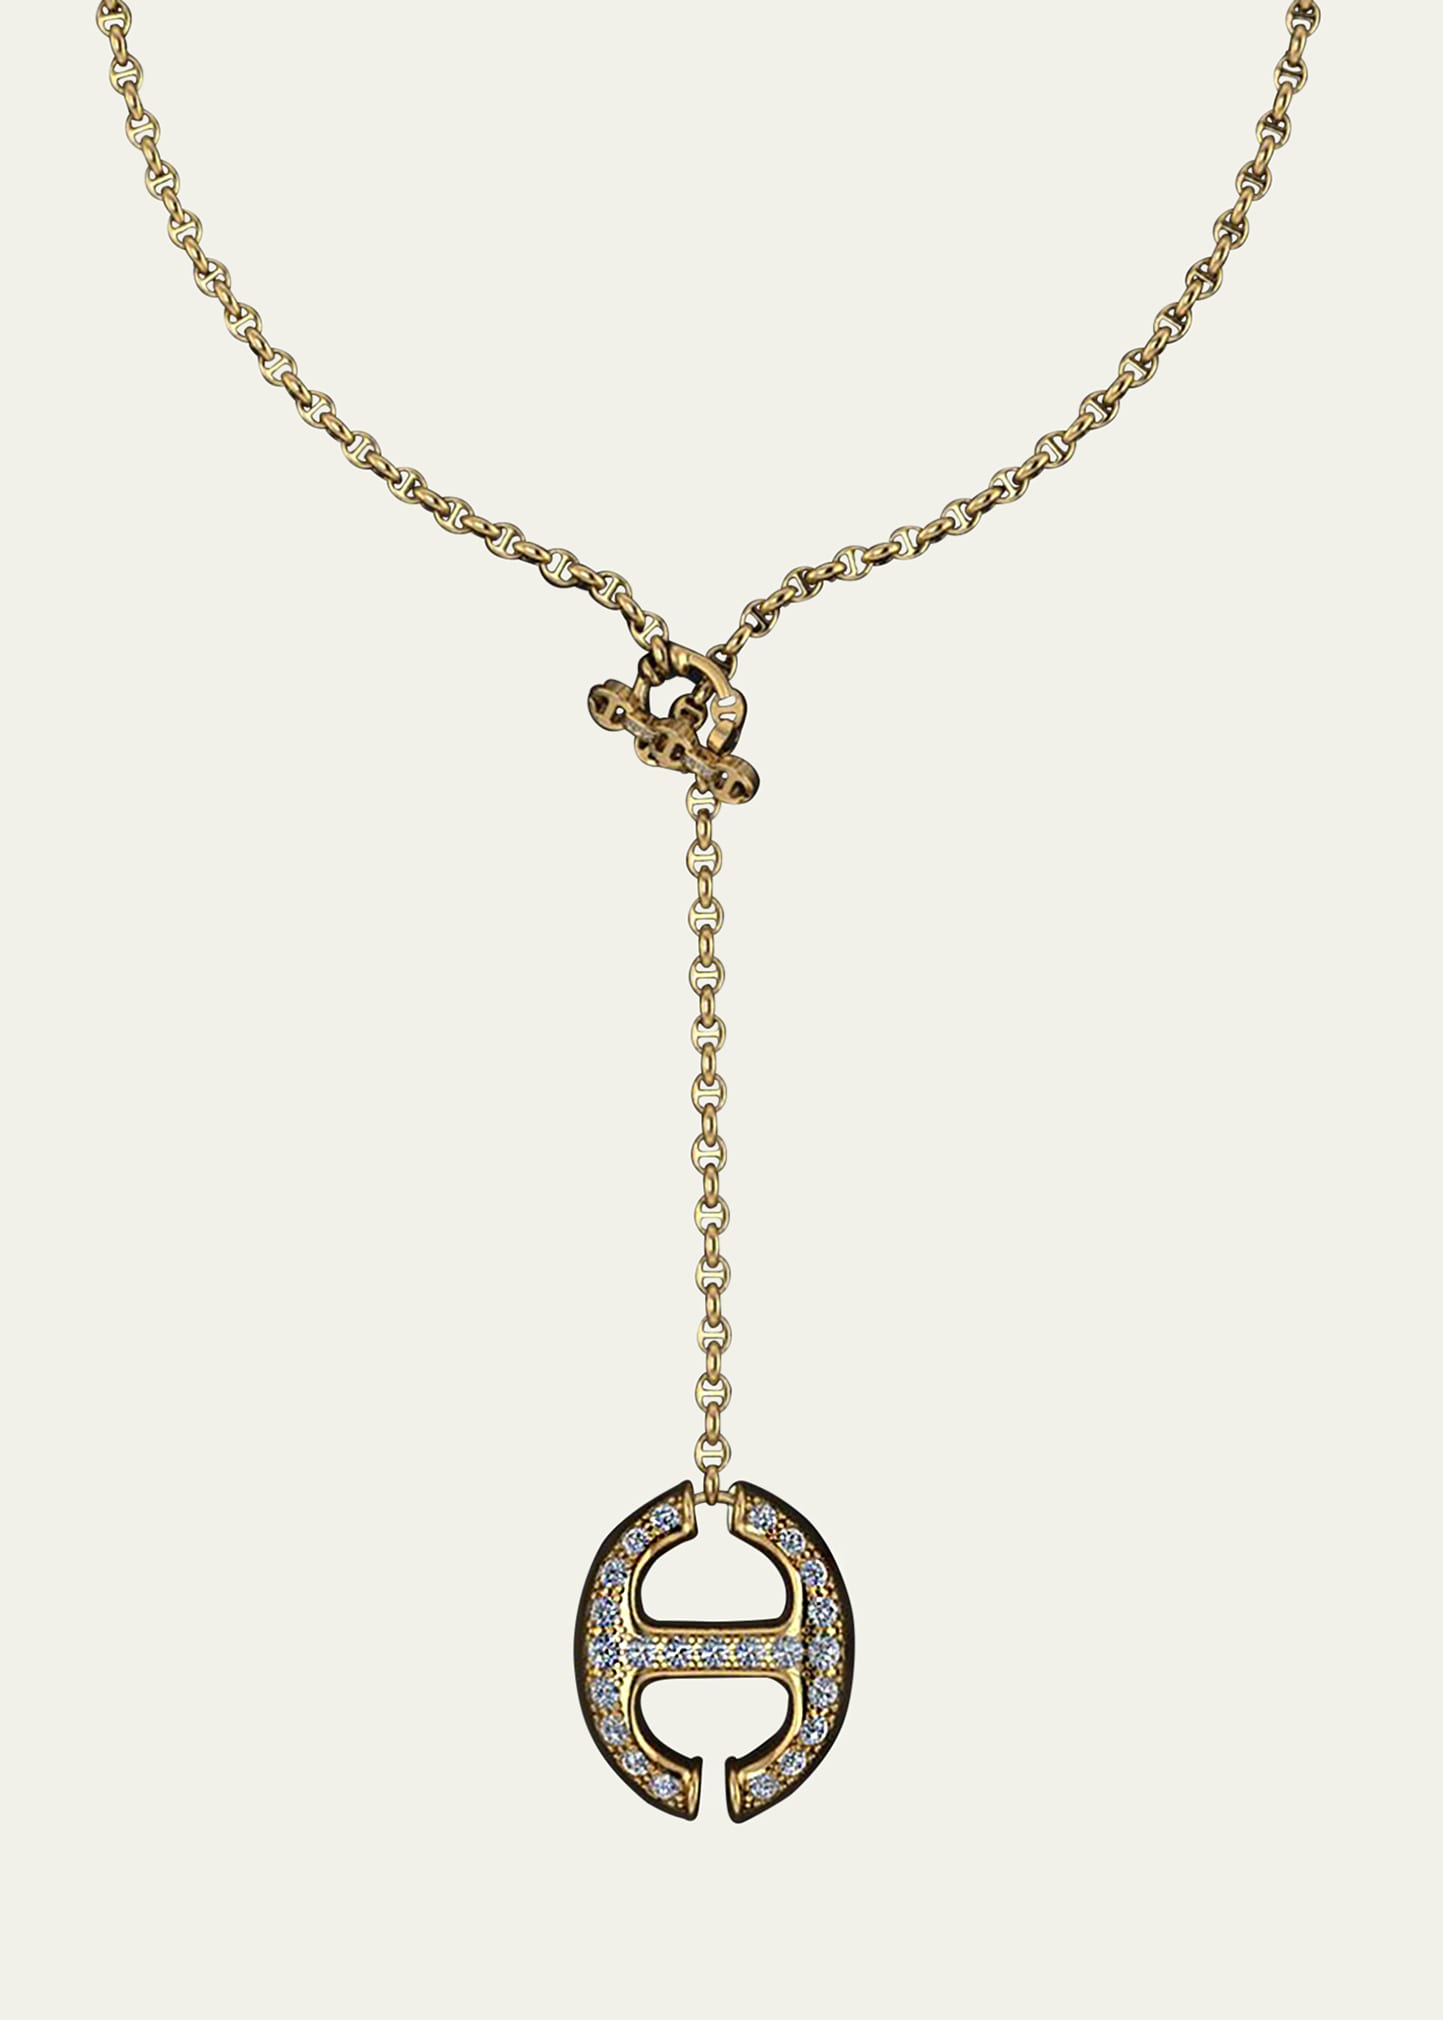 18K Yellow Gold Grand Link Lariat Necklace with White Diamond H Station, 17"L